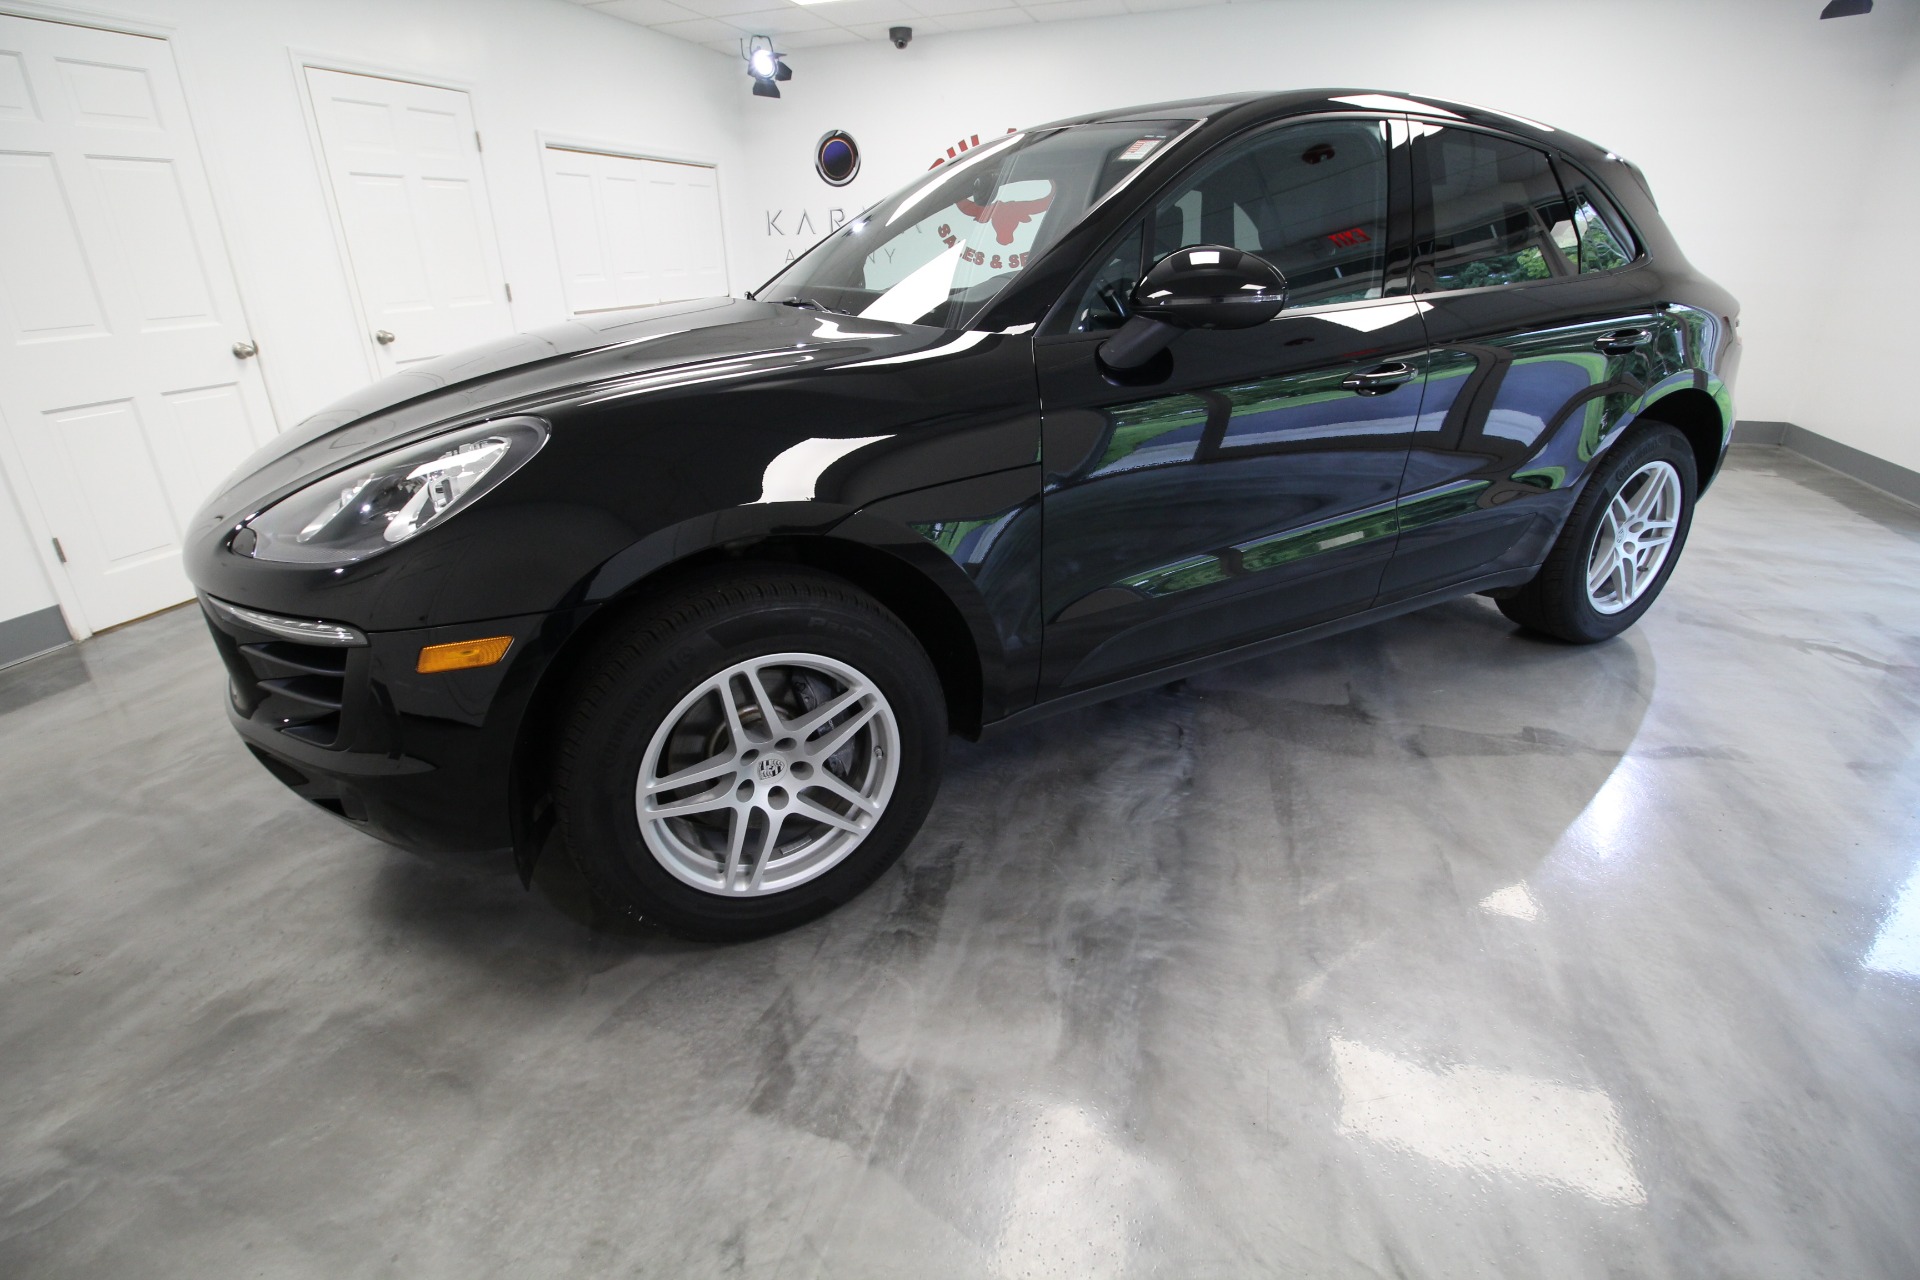 Used 2018 Black Porsche Macan Local Trade Very Clean | Albany, NY